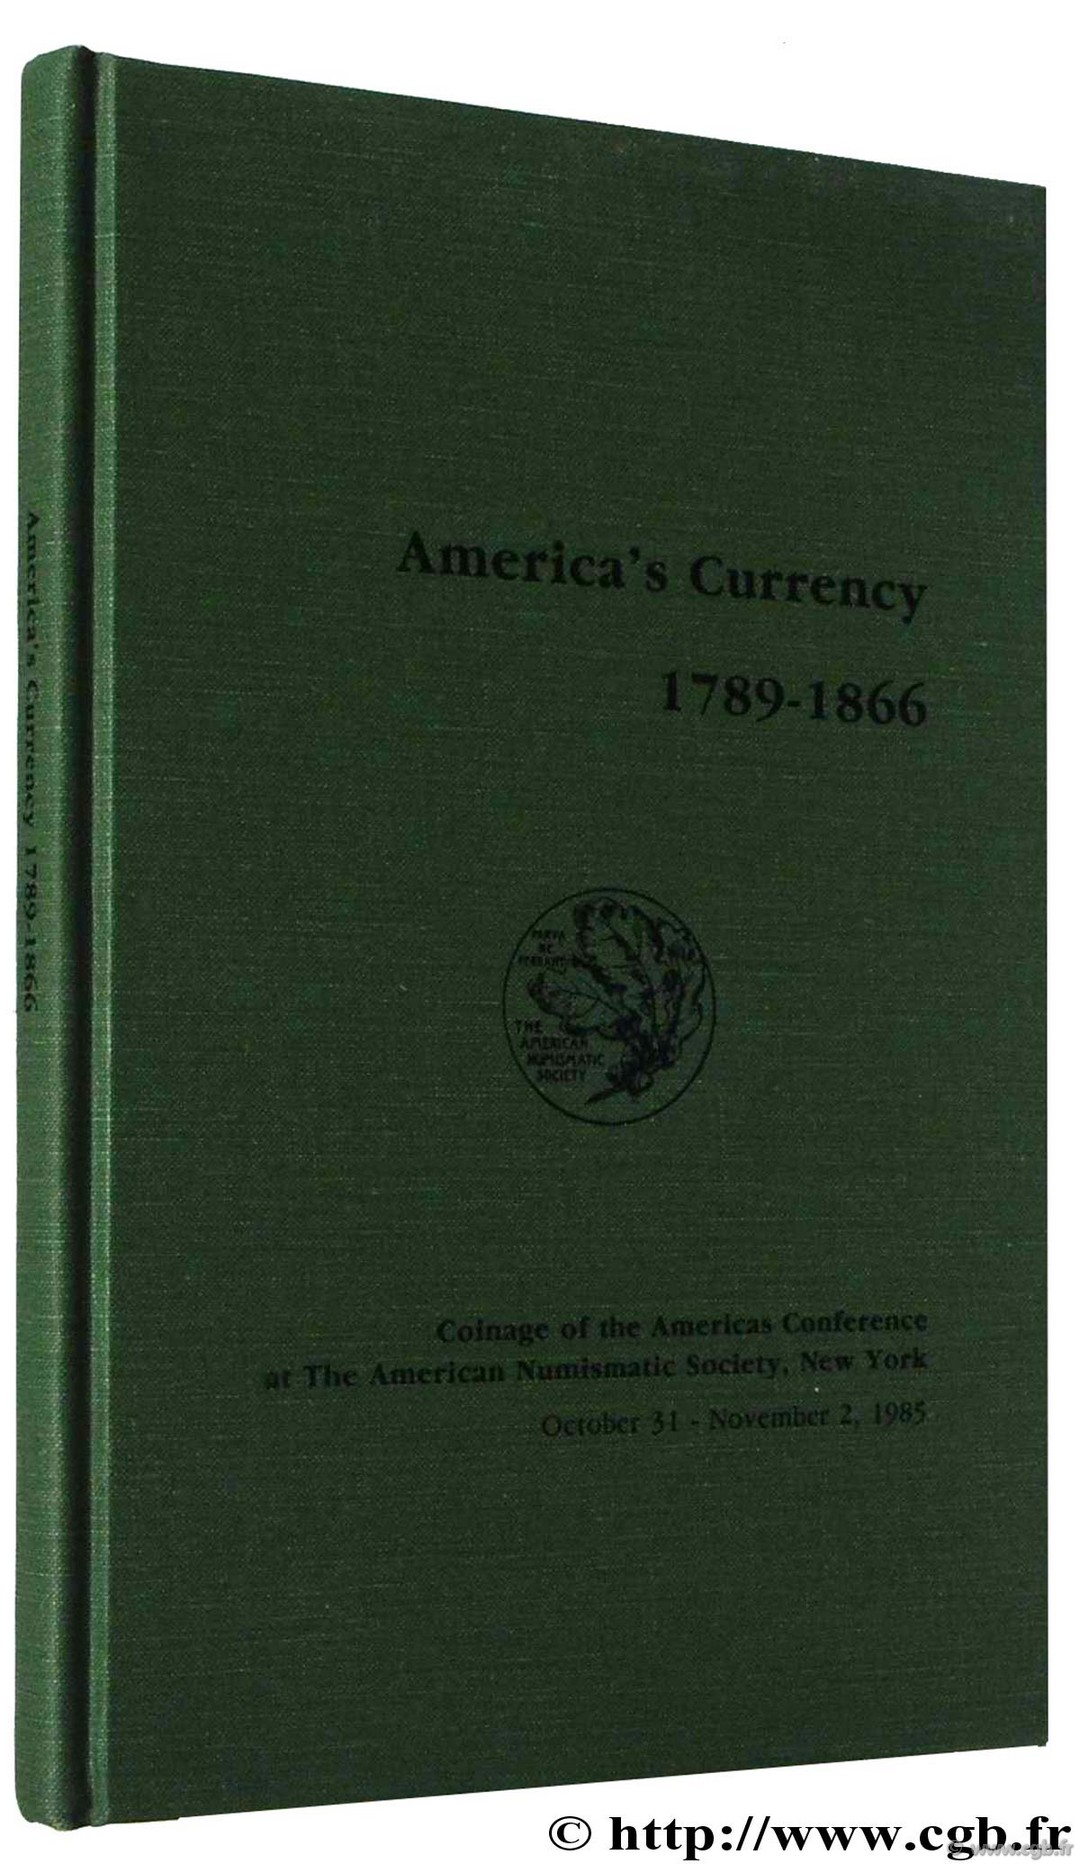 America s currency 1789-1866, coinage of the americas conférence at the American Numismatic Society, New York October 31 - November 2 1985 